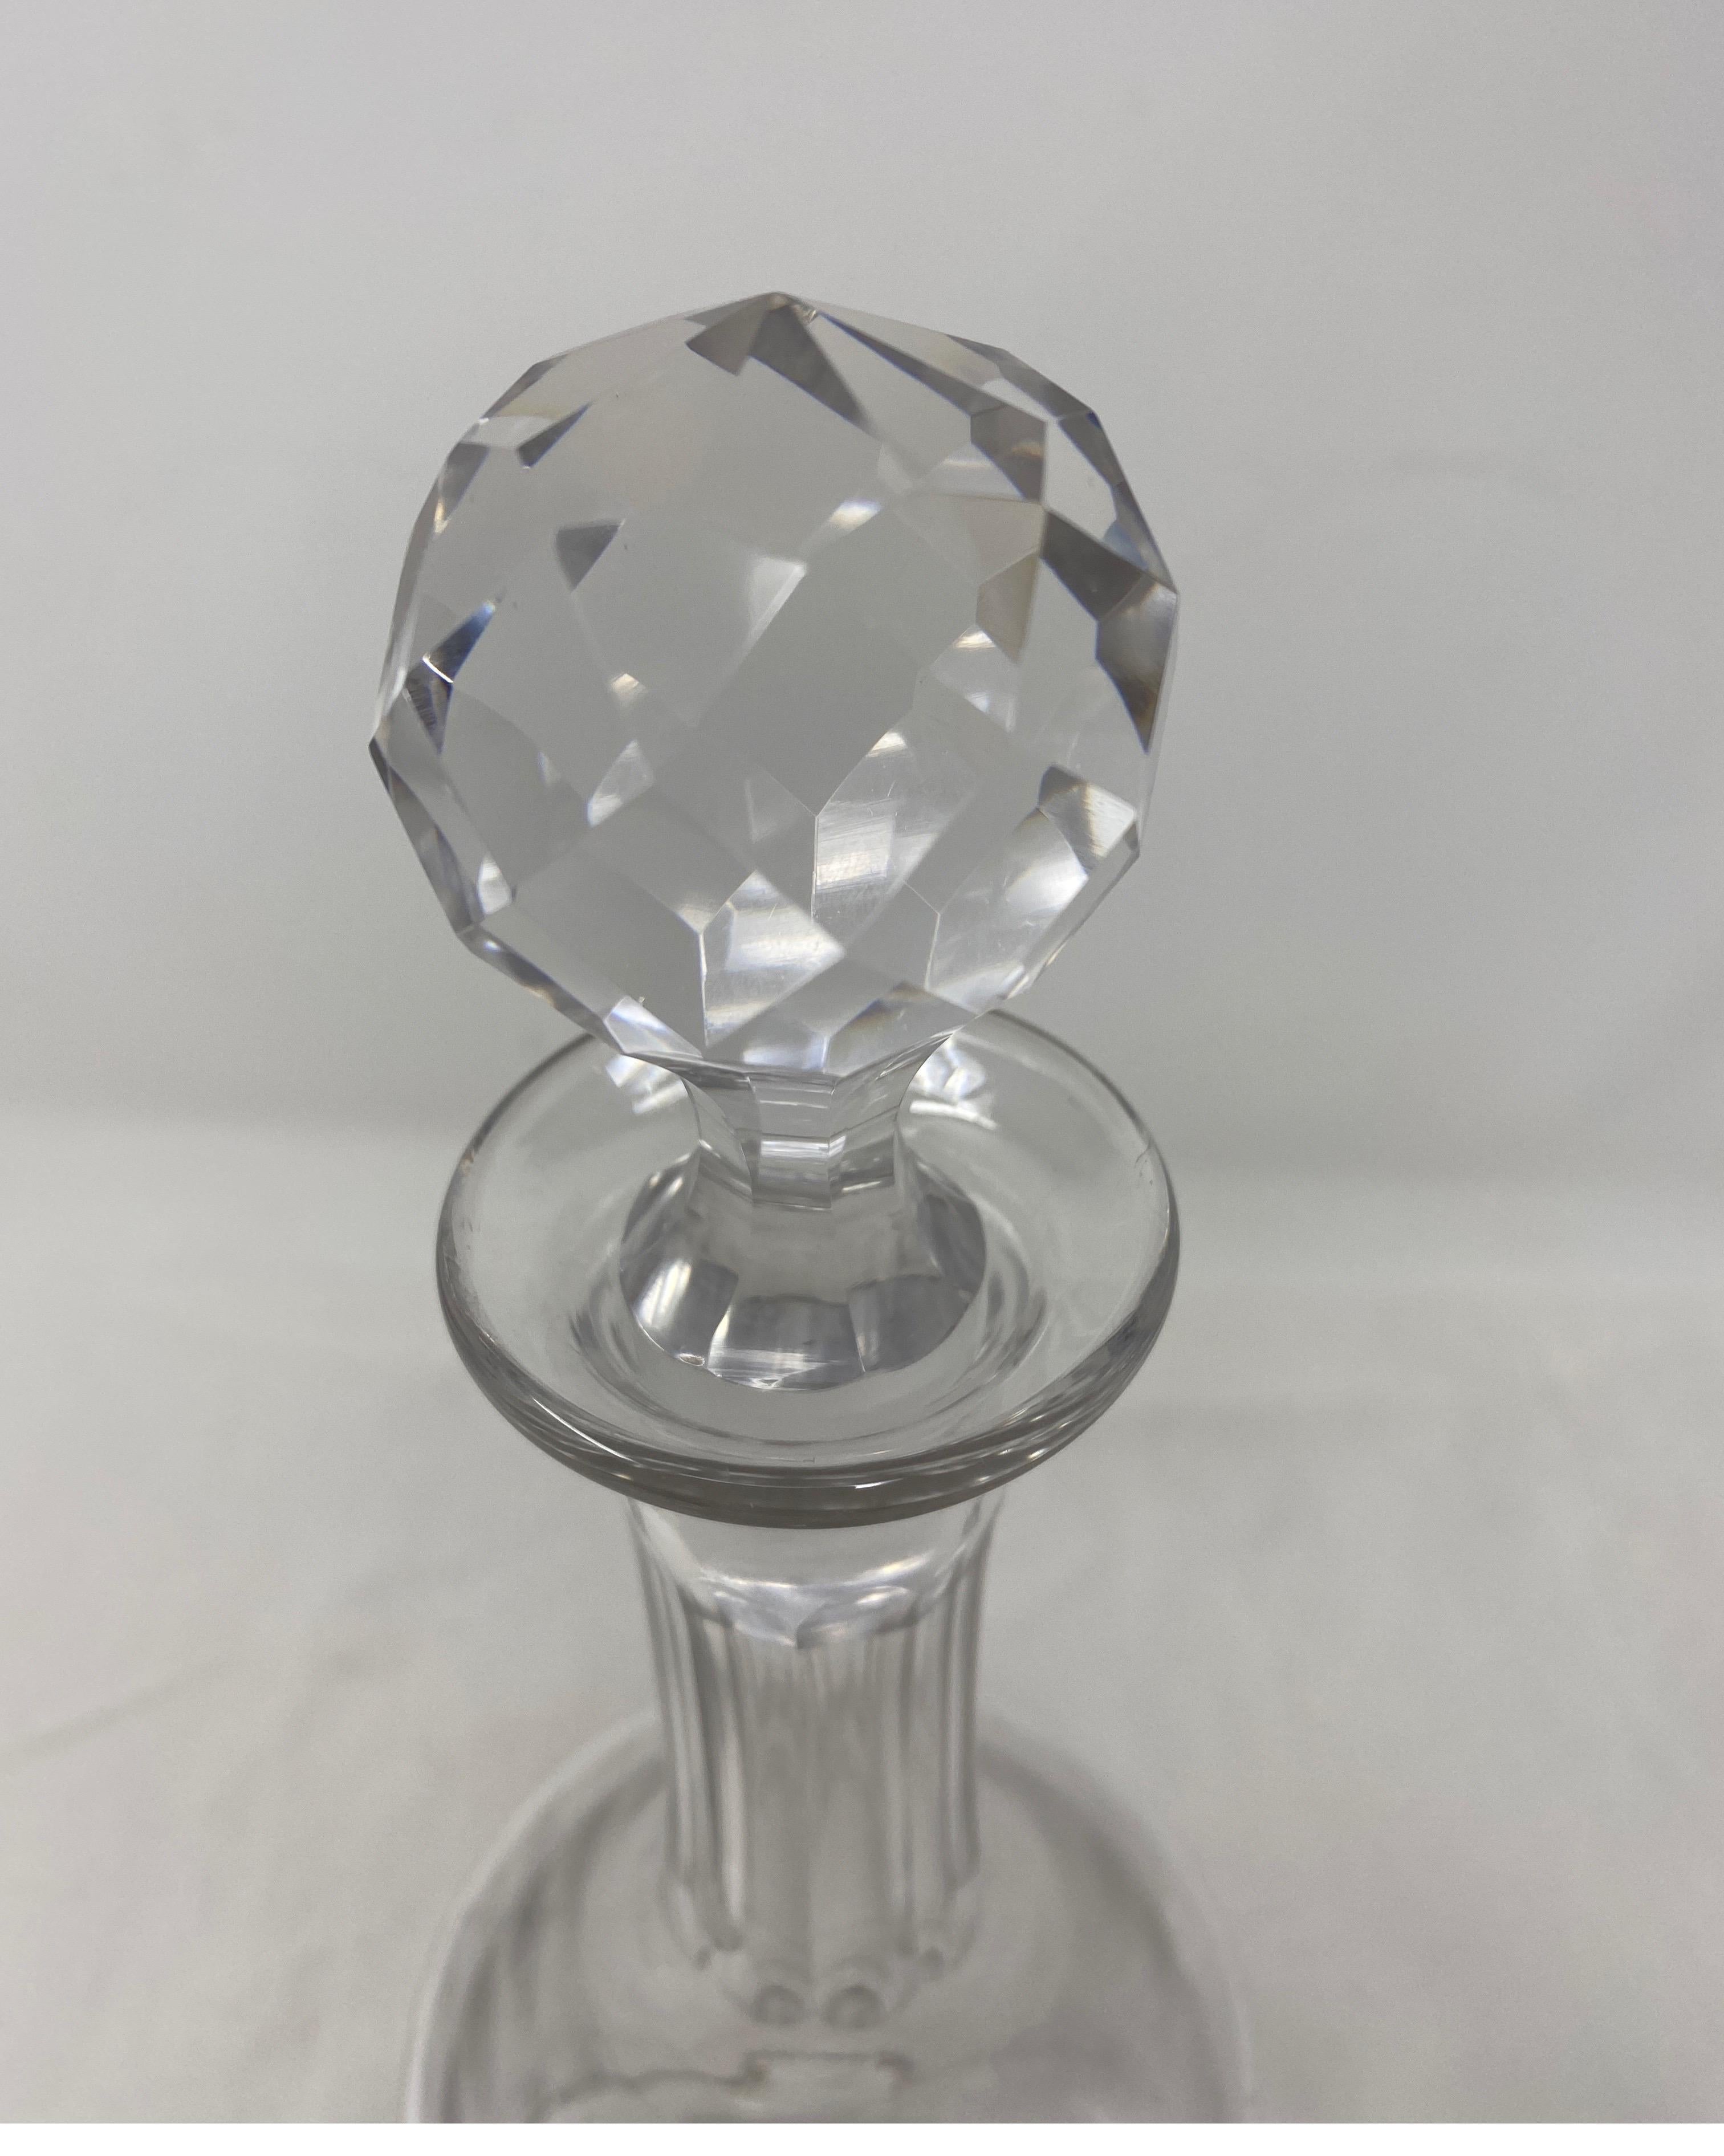 Antique Baccarat crystal decanter with stopper. 19th century.